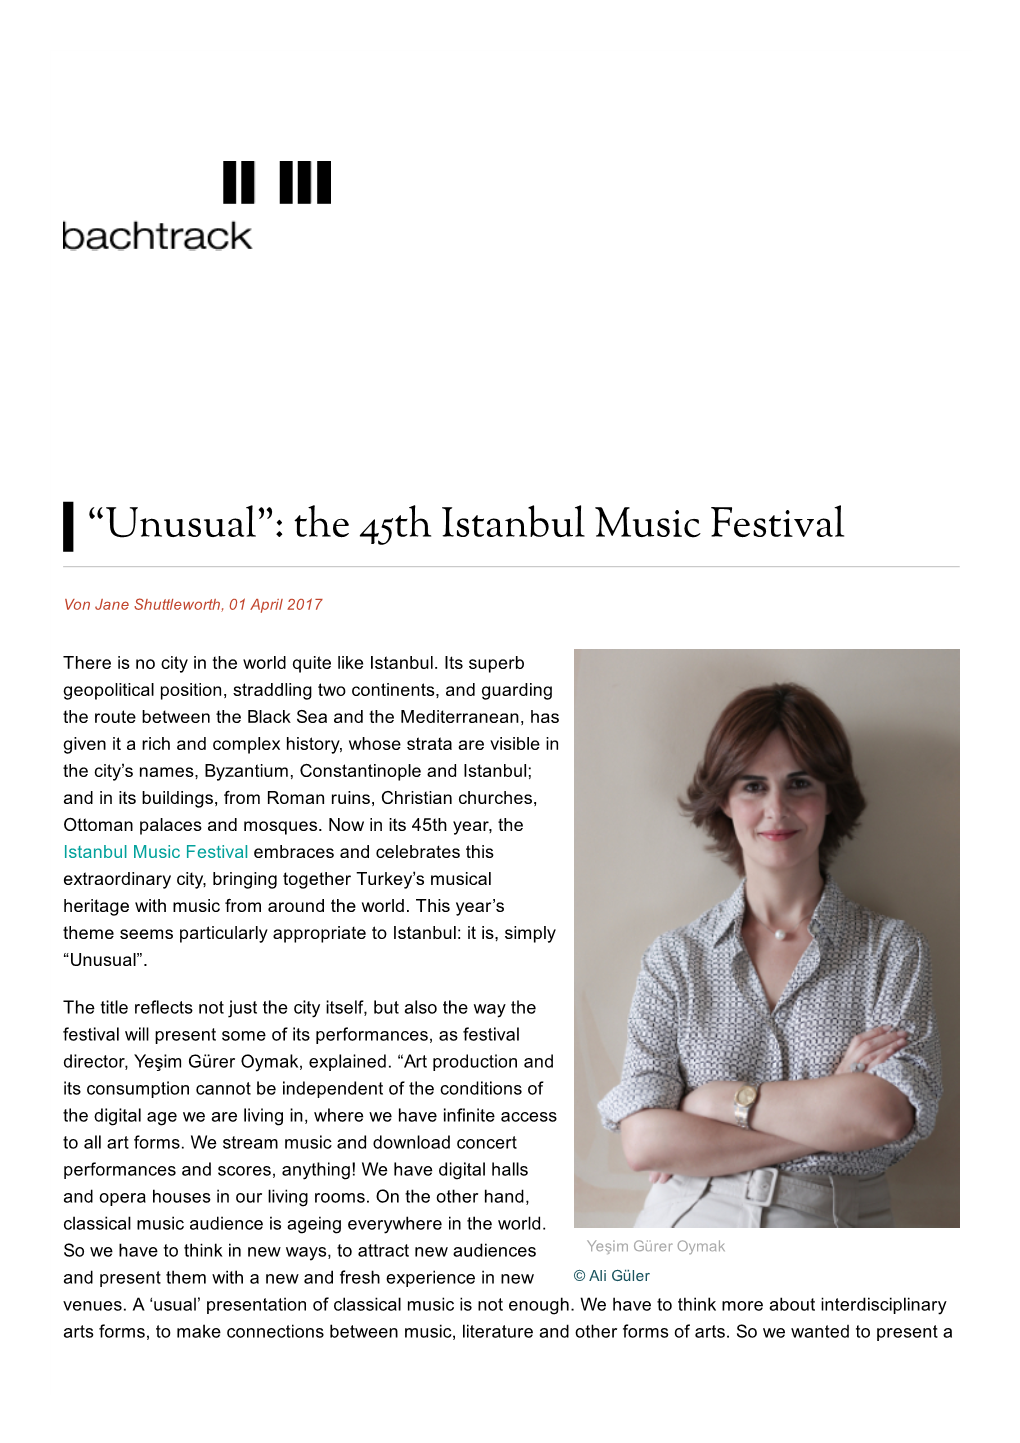 Unusual: the 45Th Istanbul Music Festival Bachtrack, İngiltere